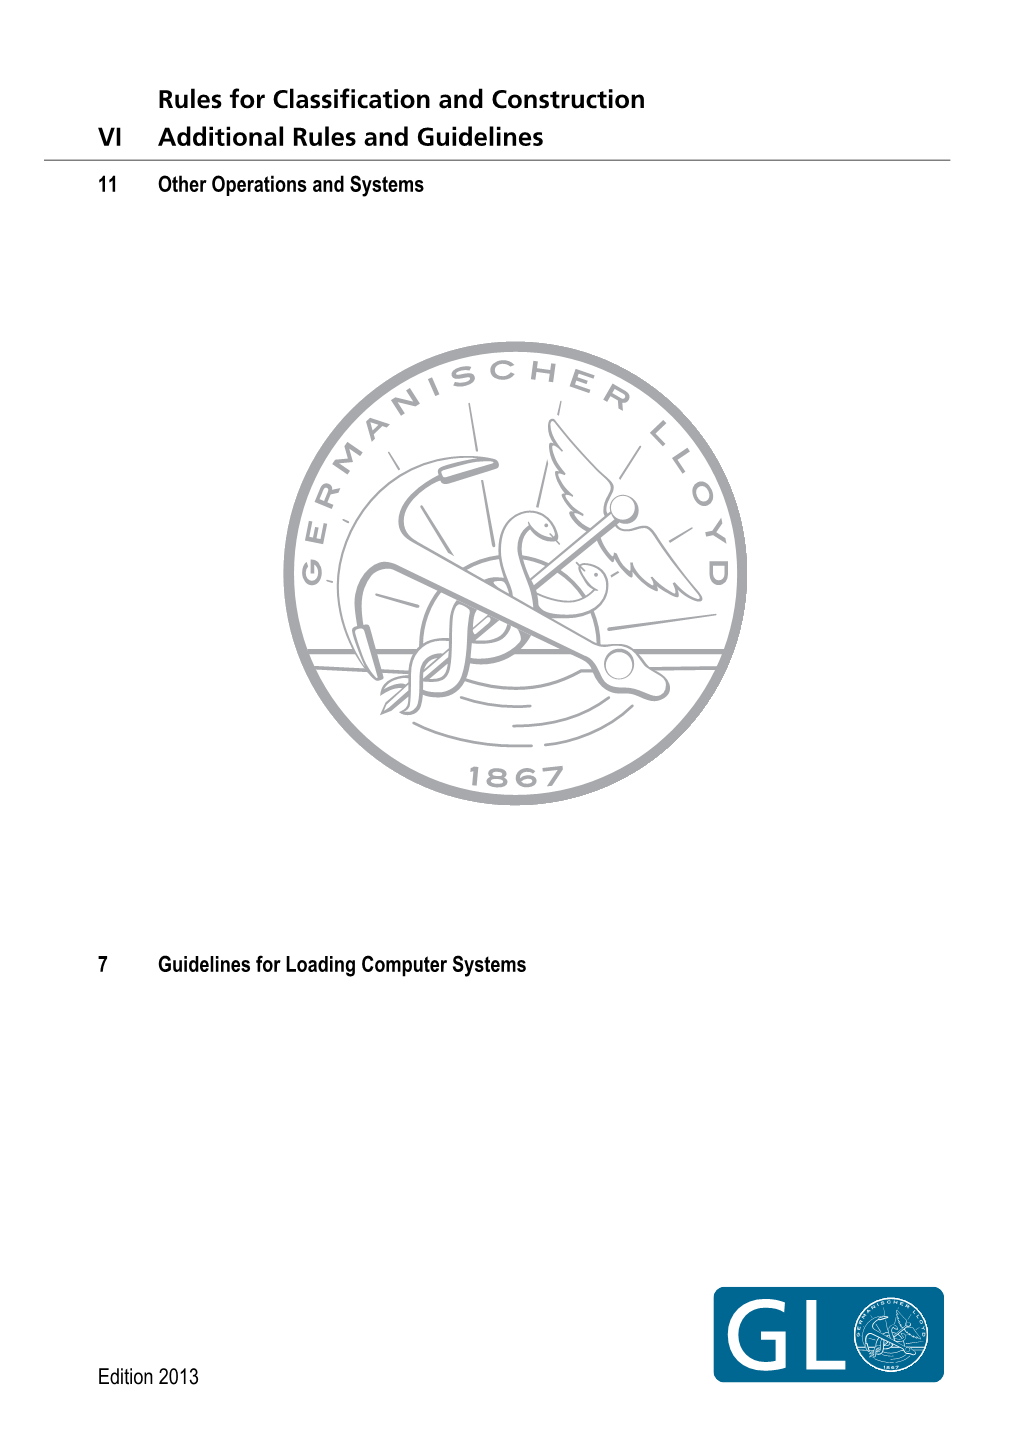 Guidelines for Loading Computer Systems (VI-11-7)